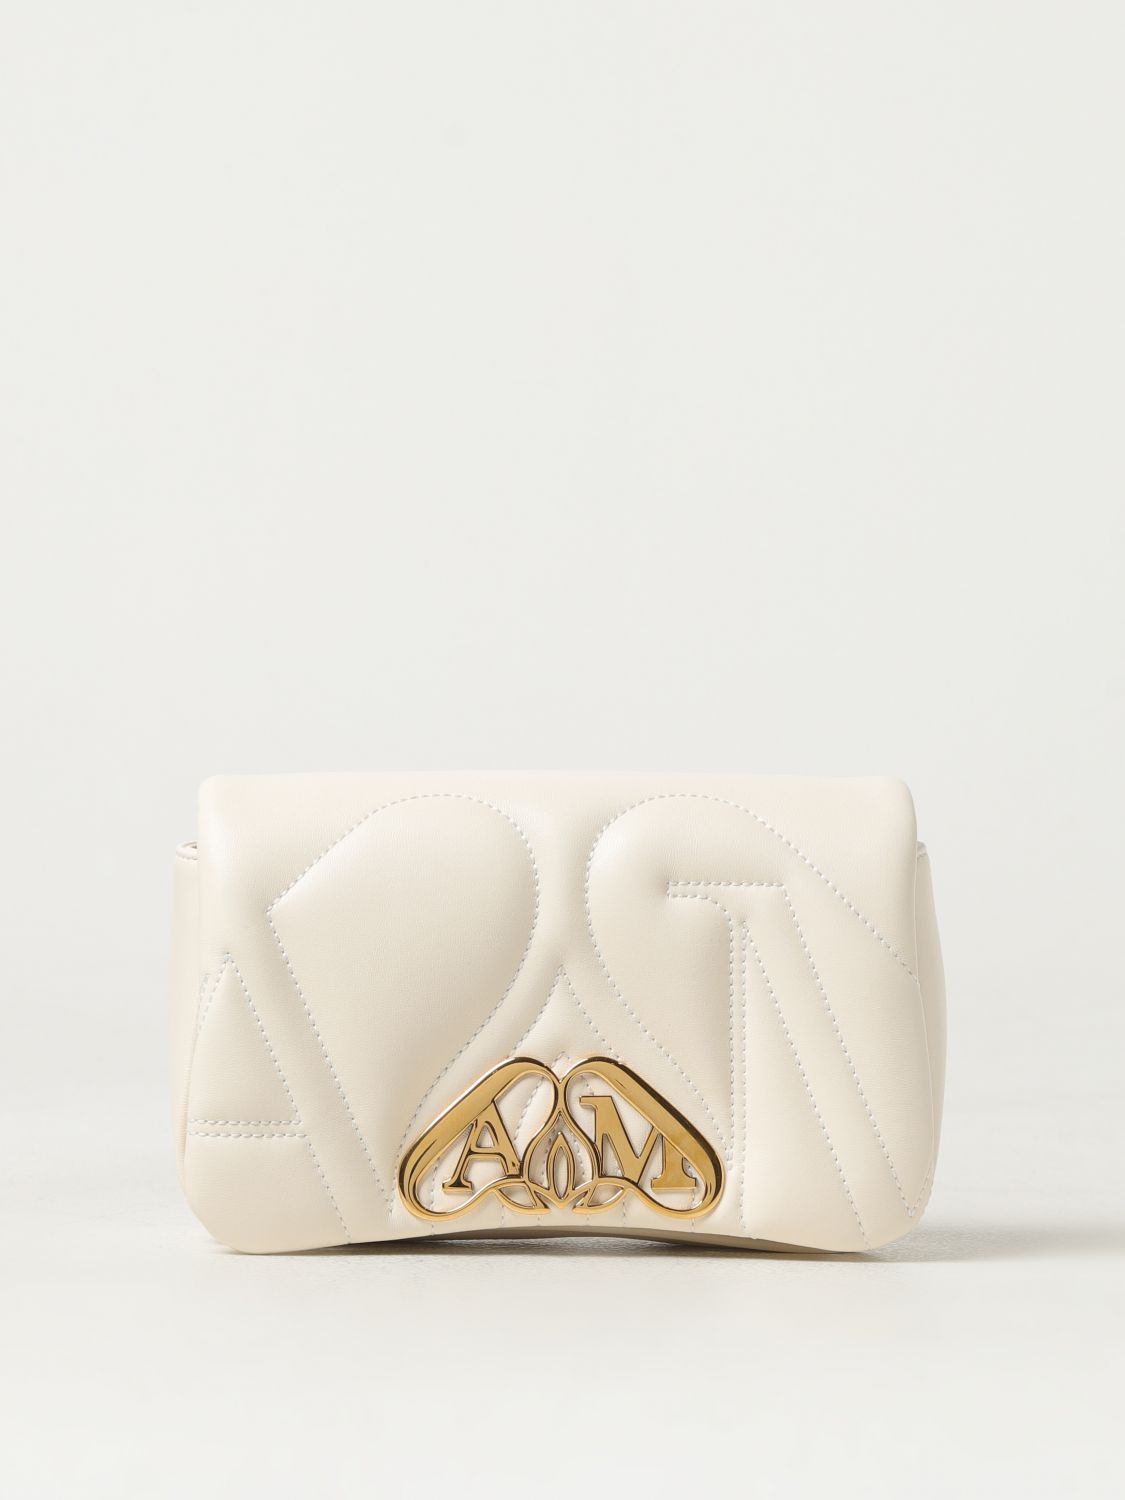 Alexander Mcqueen Seal Clutch In Quilted Leather In Yellow Cream